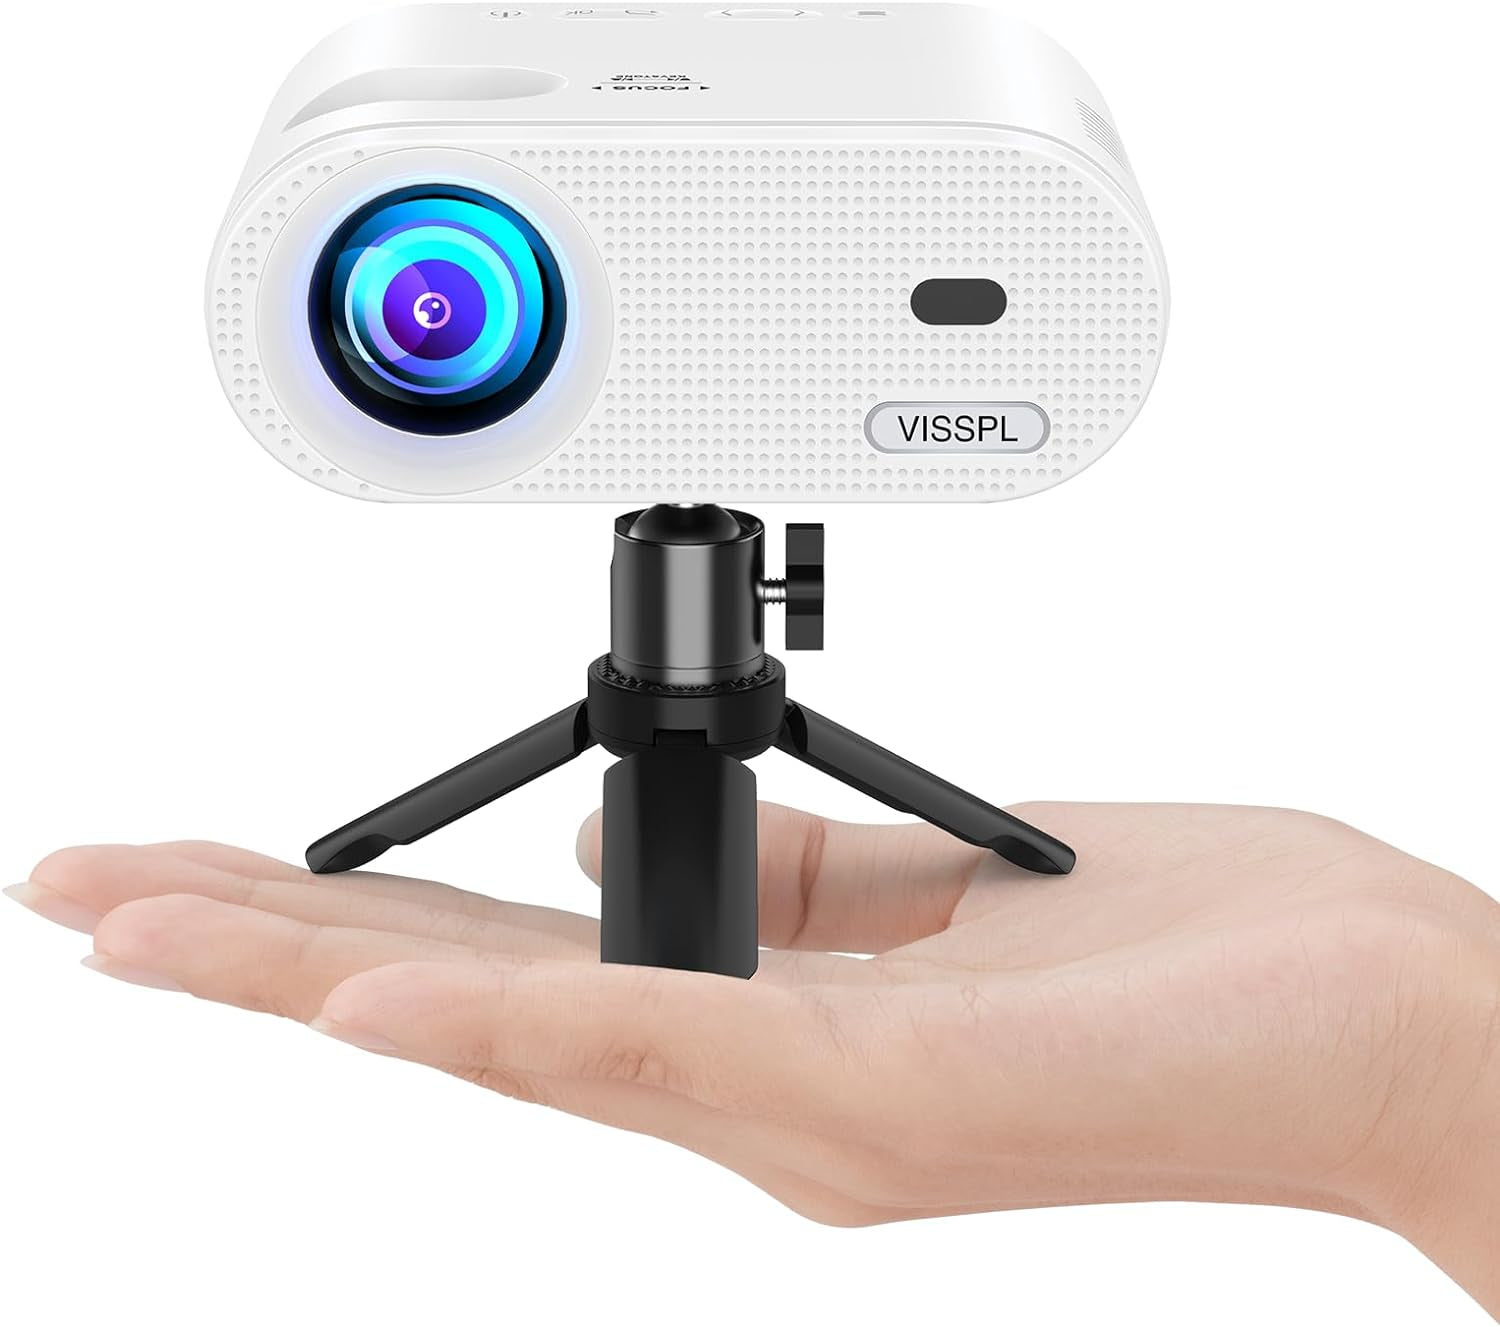 Mini Projector,  Full HD 1080P Video Projector, Portable Outdoor Projector with Tripod, Kids Gift, Home Theater Movie Phone Projector Compatible with Android/Ios/Windows/Tv Stick/Hdmi/Usb